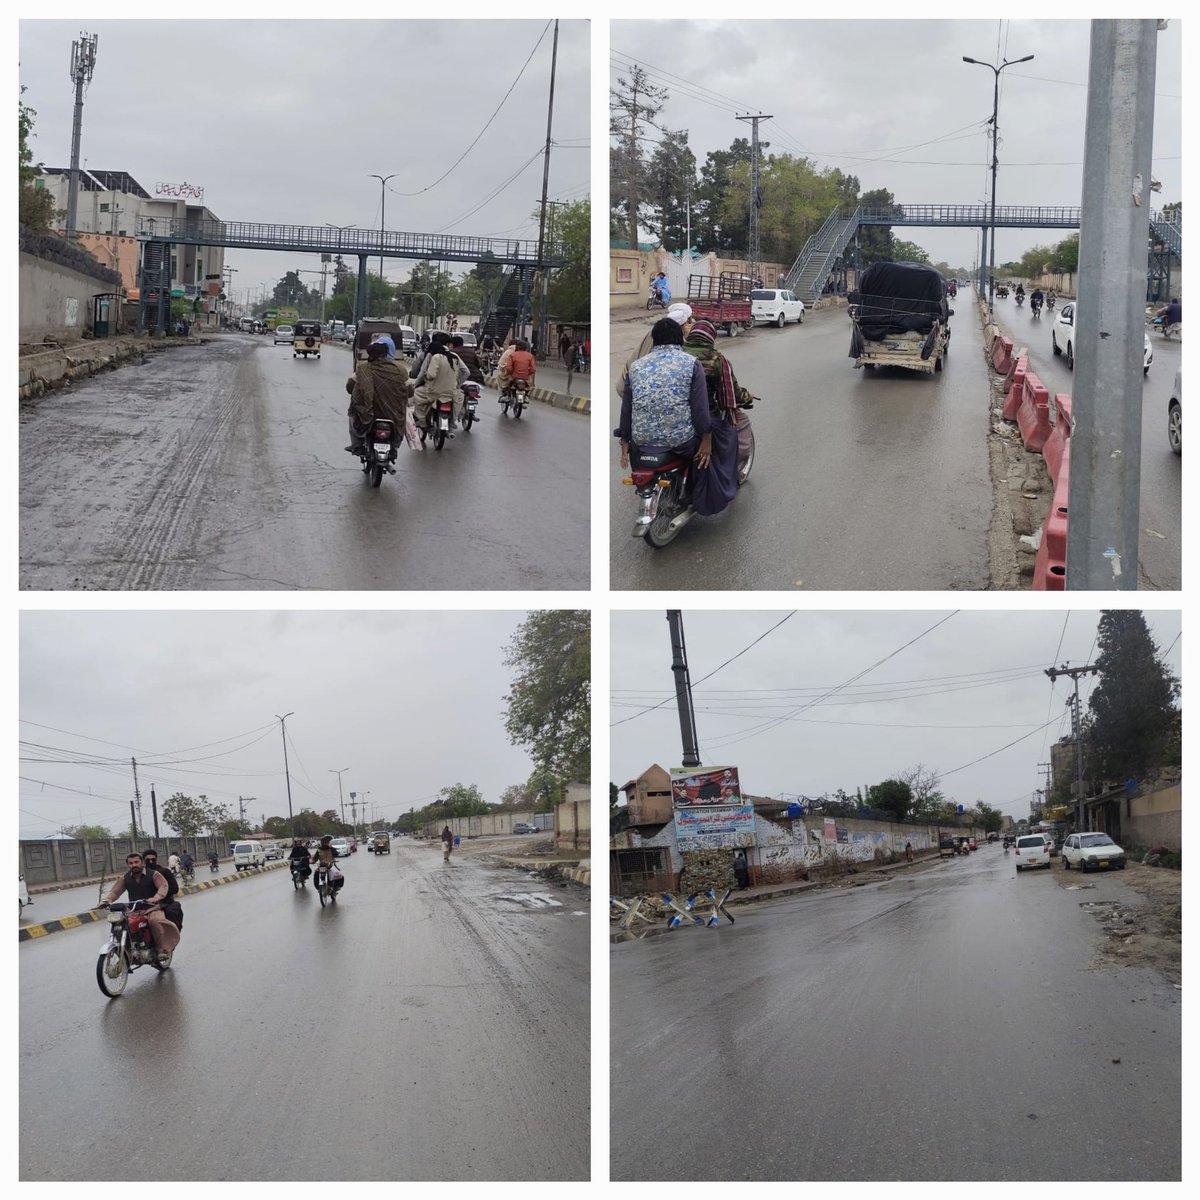 Despite the #rain 's persistence, #Quetta streets remain spotless, a testament to the tireless dedication of @MCQuettaGov . With every drain cleared, every nullah flowing freely, they exemplify resilience and commitment. Let's shower them with appreciation @hamzashafqaat